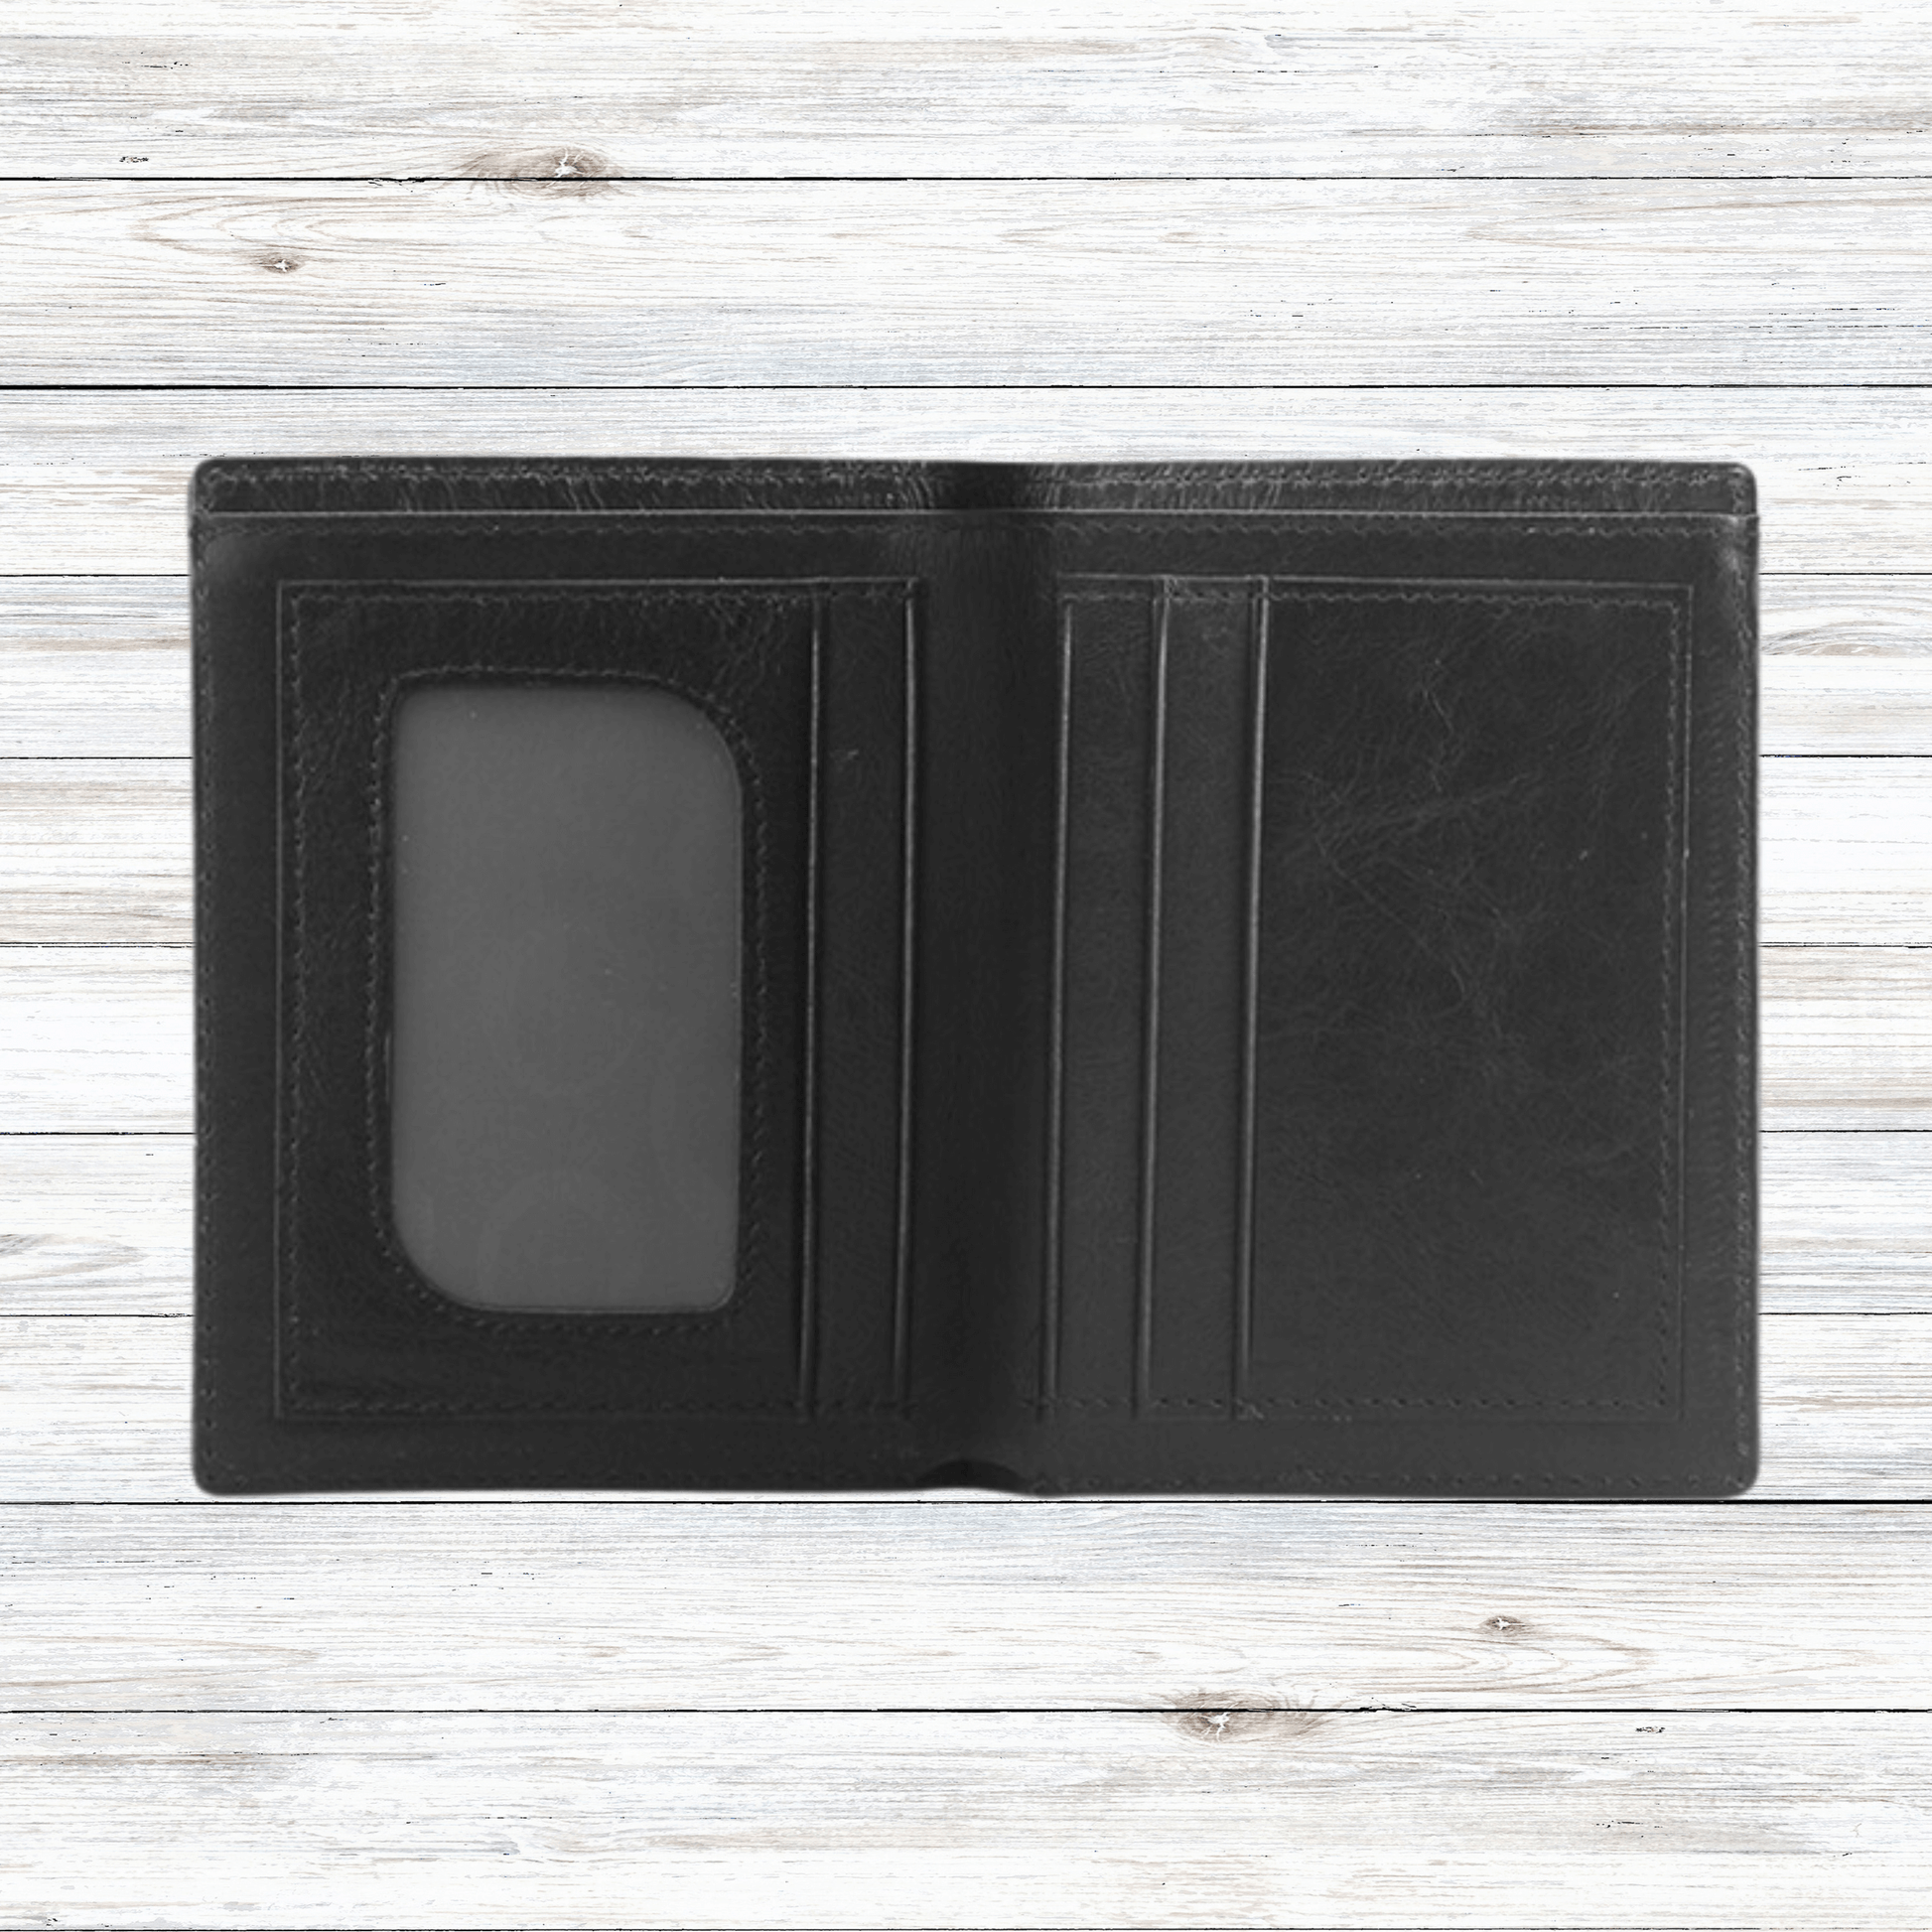 The inside of our black mens wallet shows four card holders and one window and two places for money